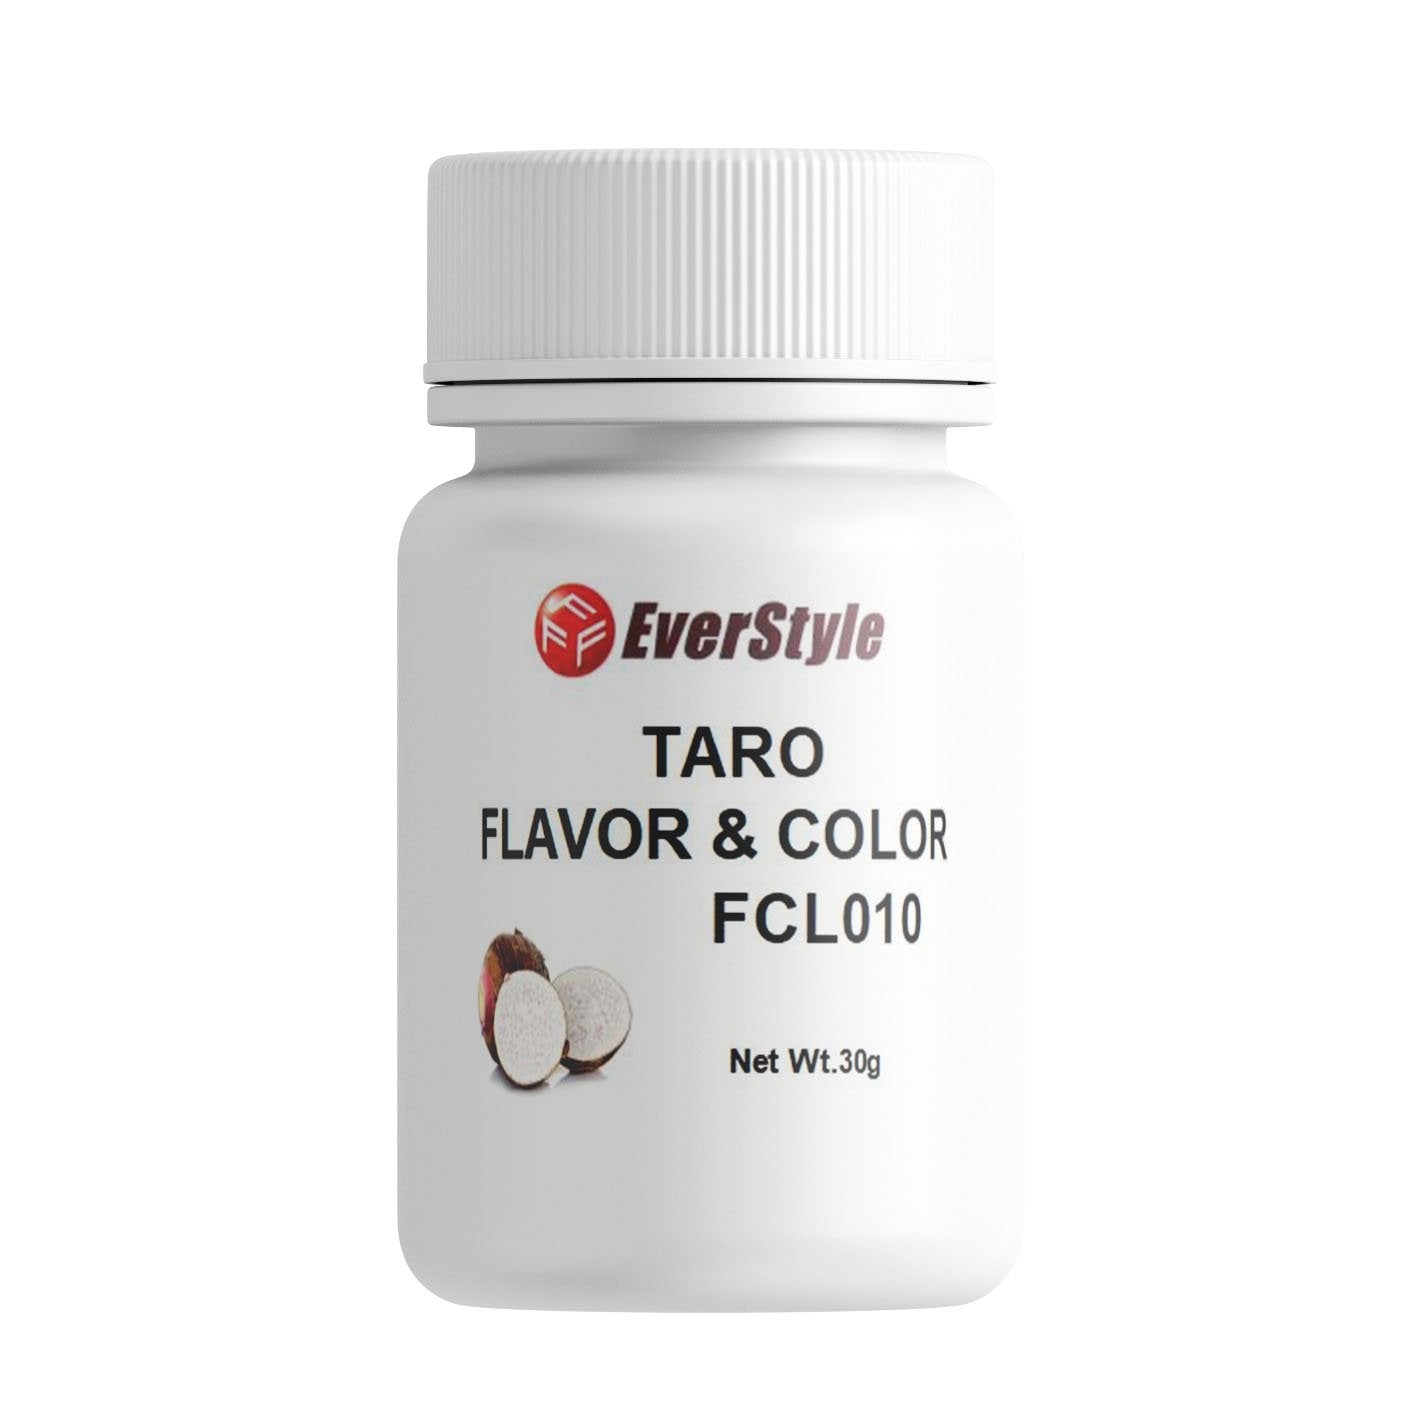 Everstyle Taro Flavor & Color 30g (FCL010) 